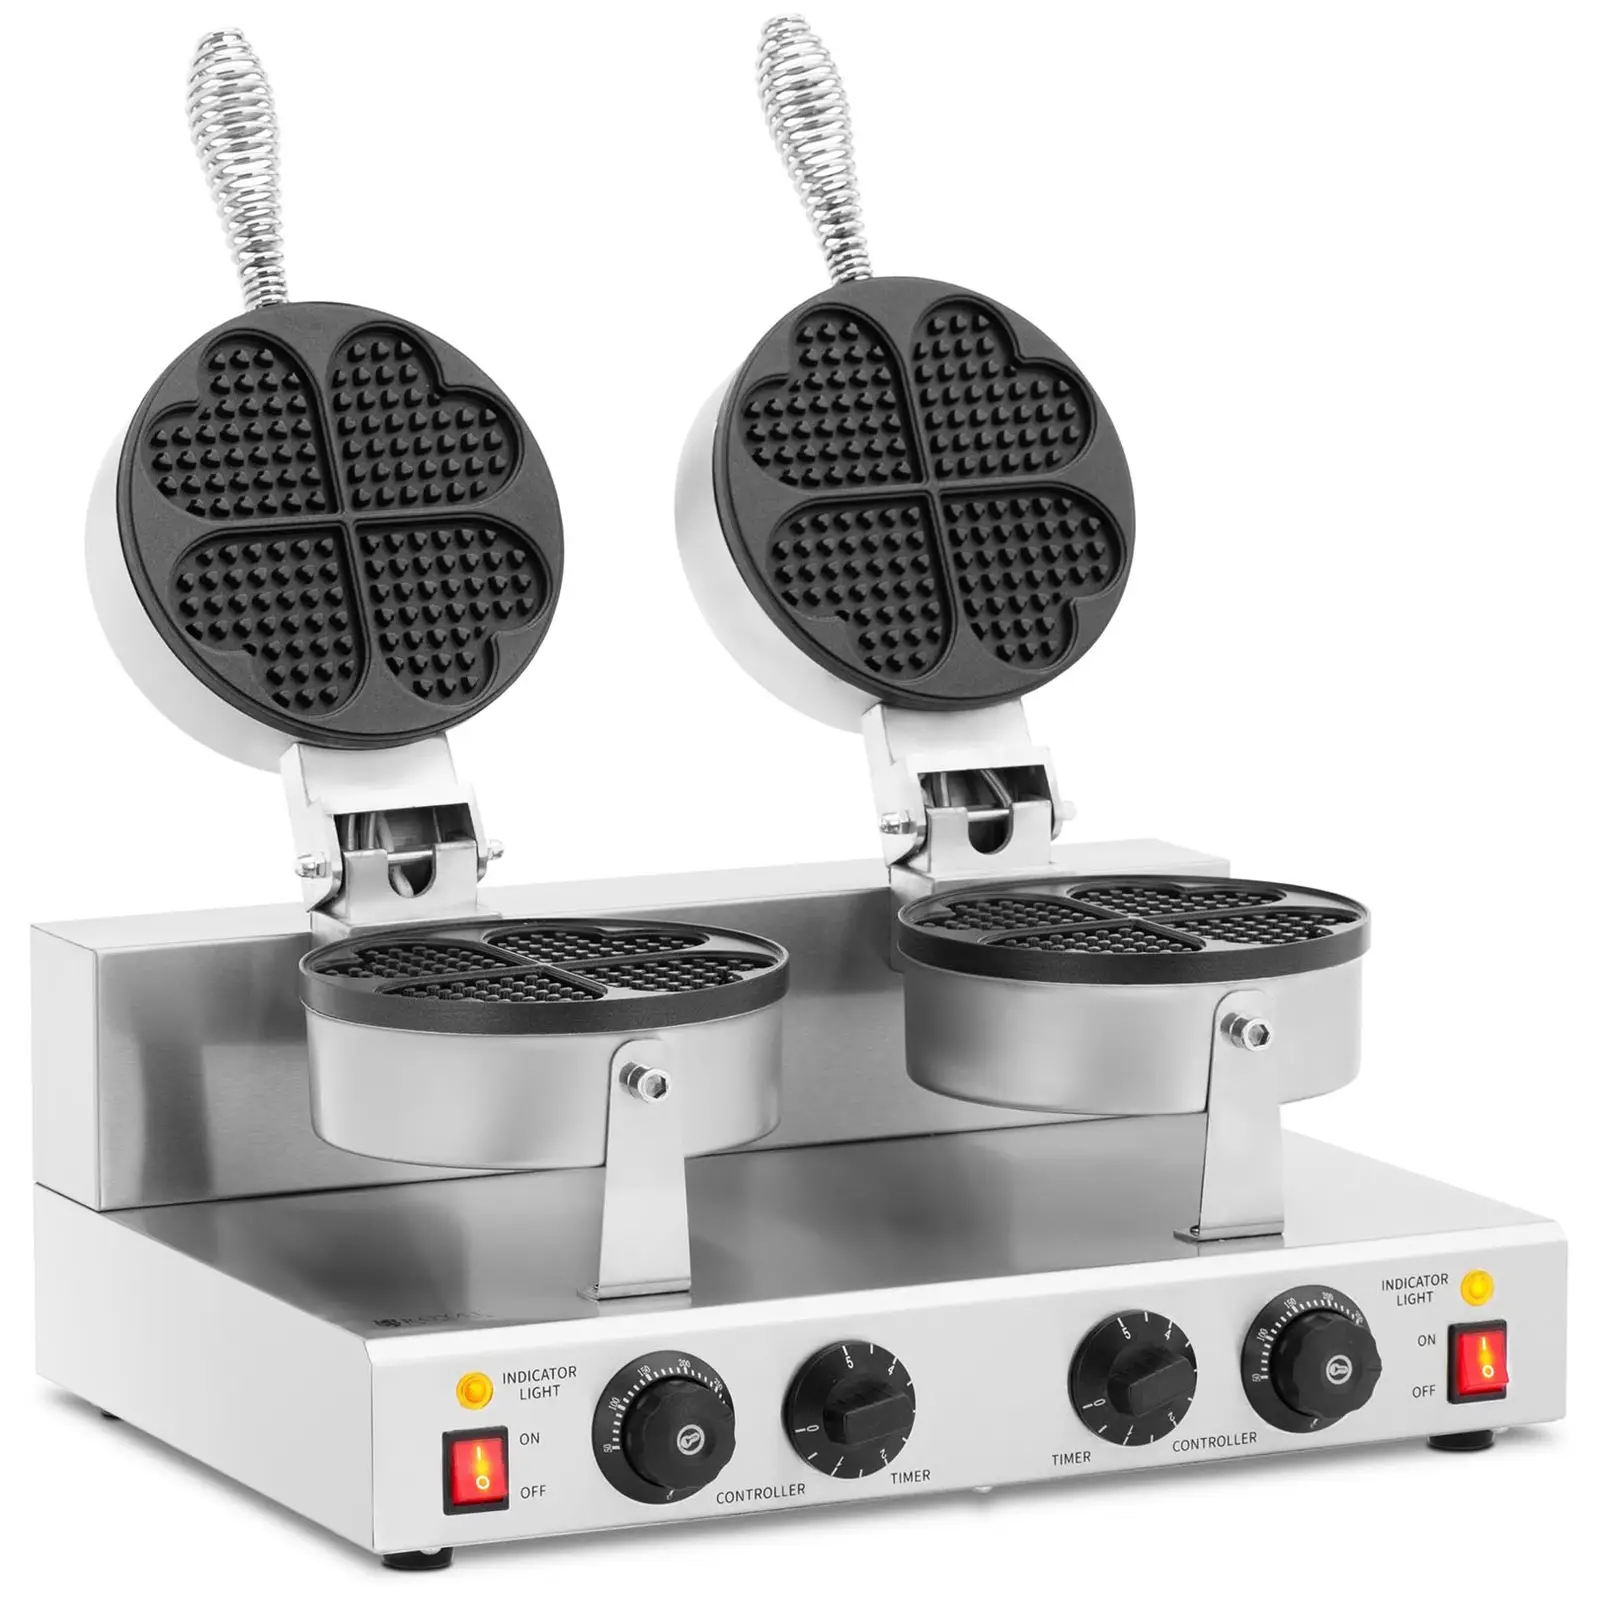 Double Waffle Iron - heart-shaped - 2000 W - 0 - 5 min timer - Royal Catering